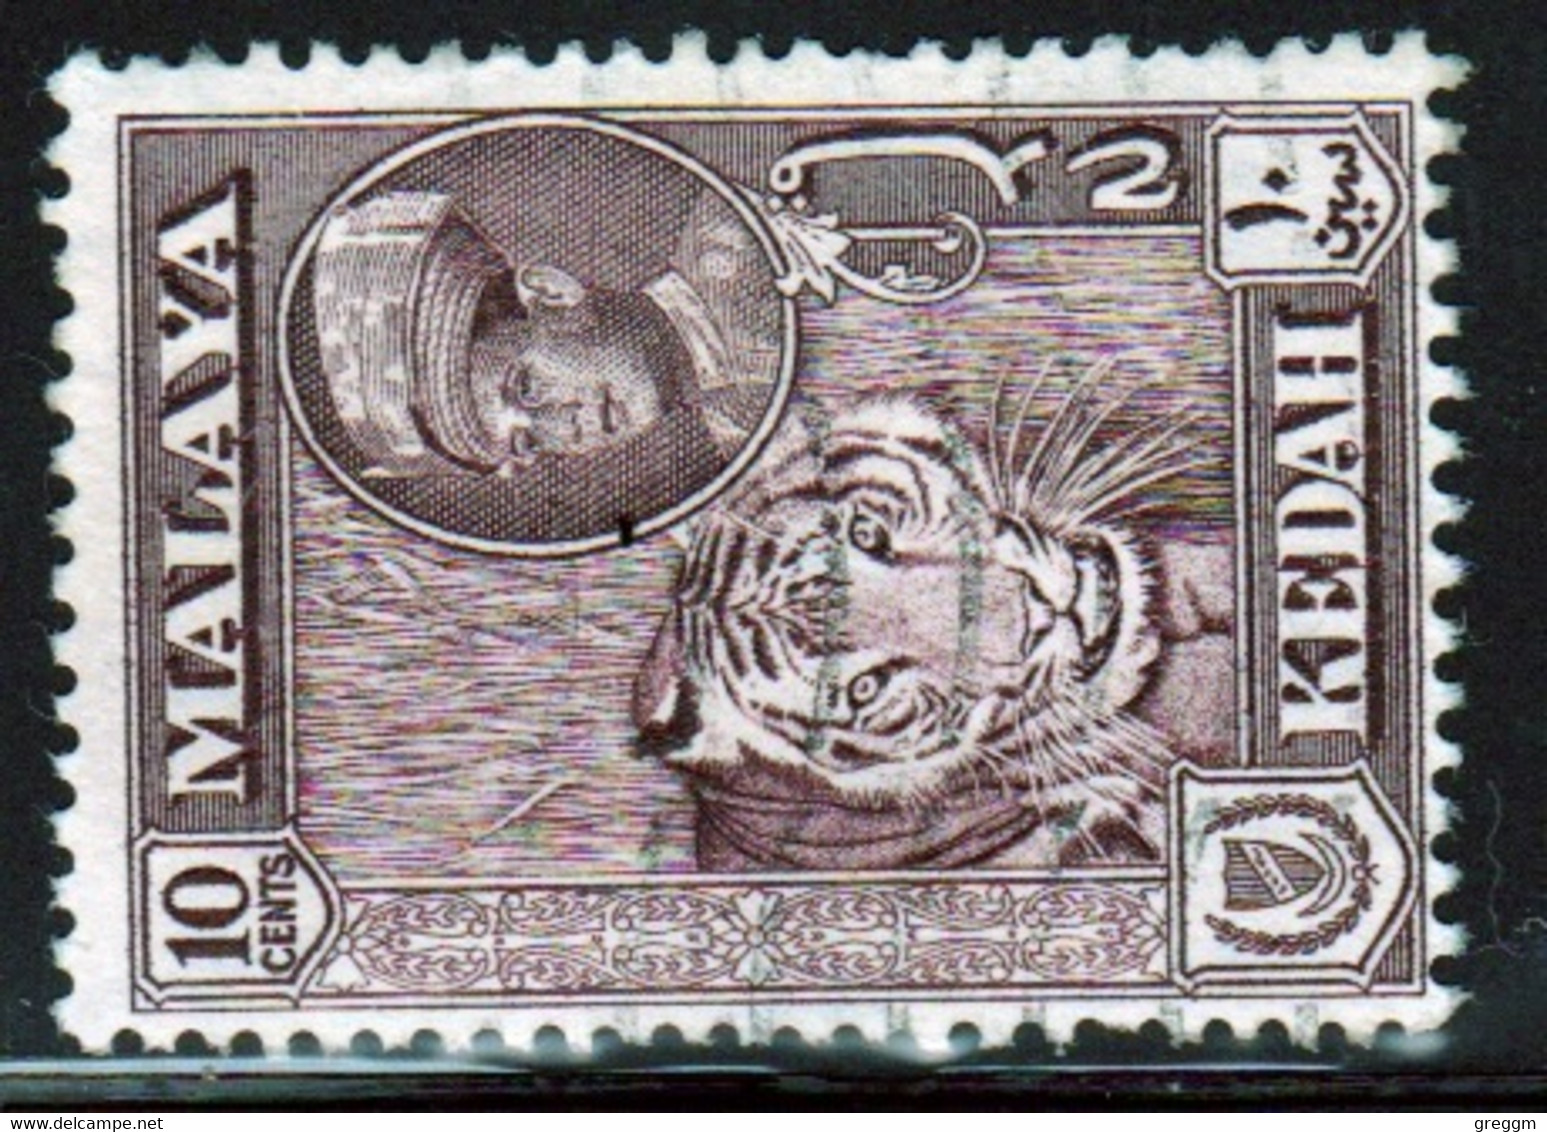 Malaysia Kedah 1959 Single 10c Definitive Stamp Which Is I Believe Cat No 109a In Fine Used - Kedah